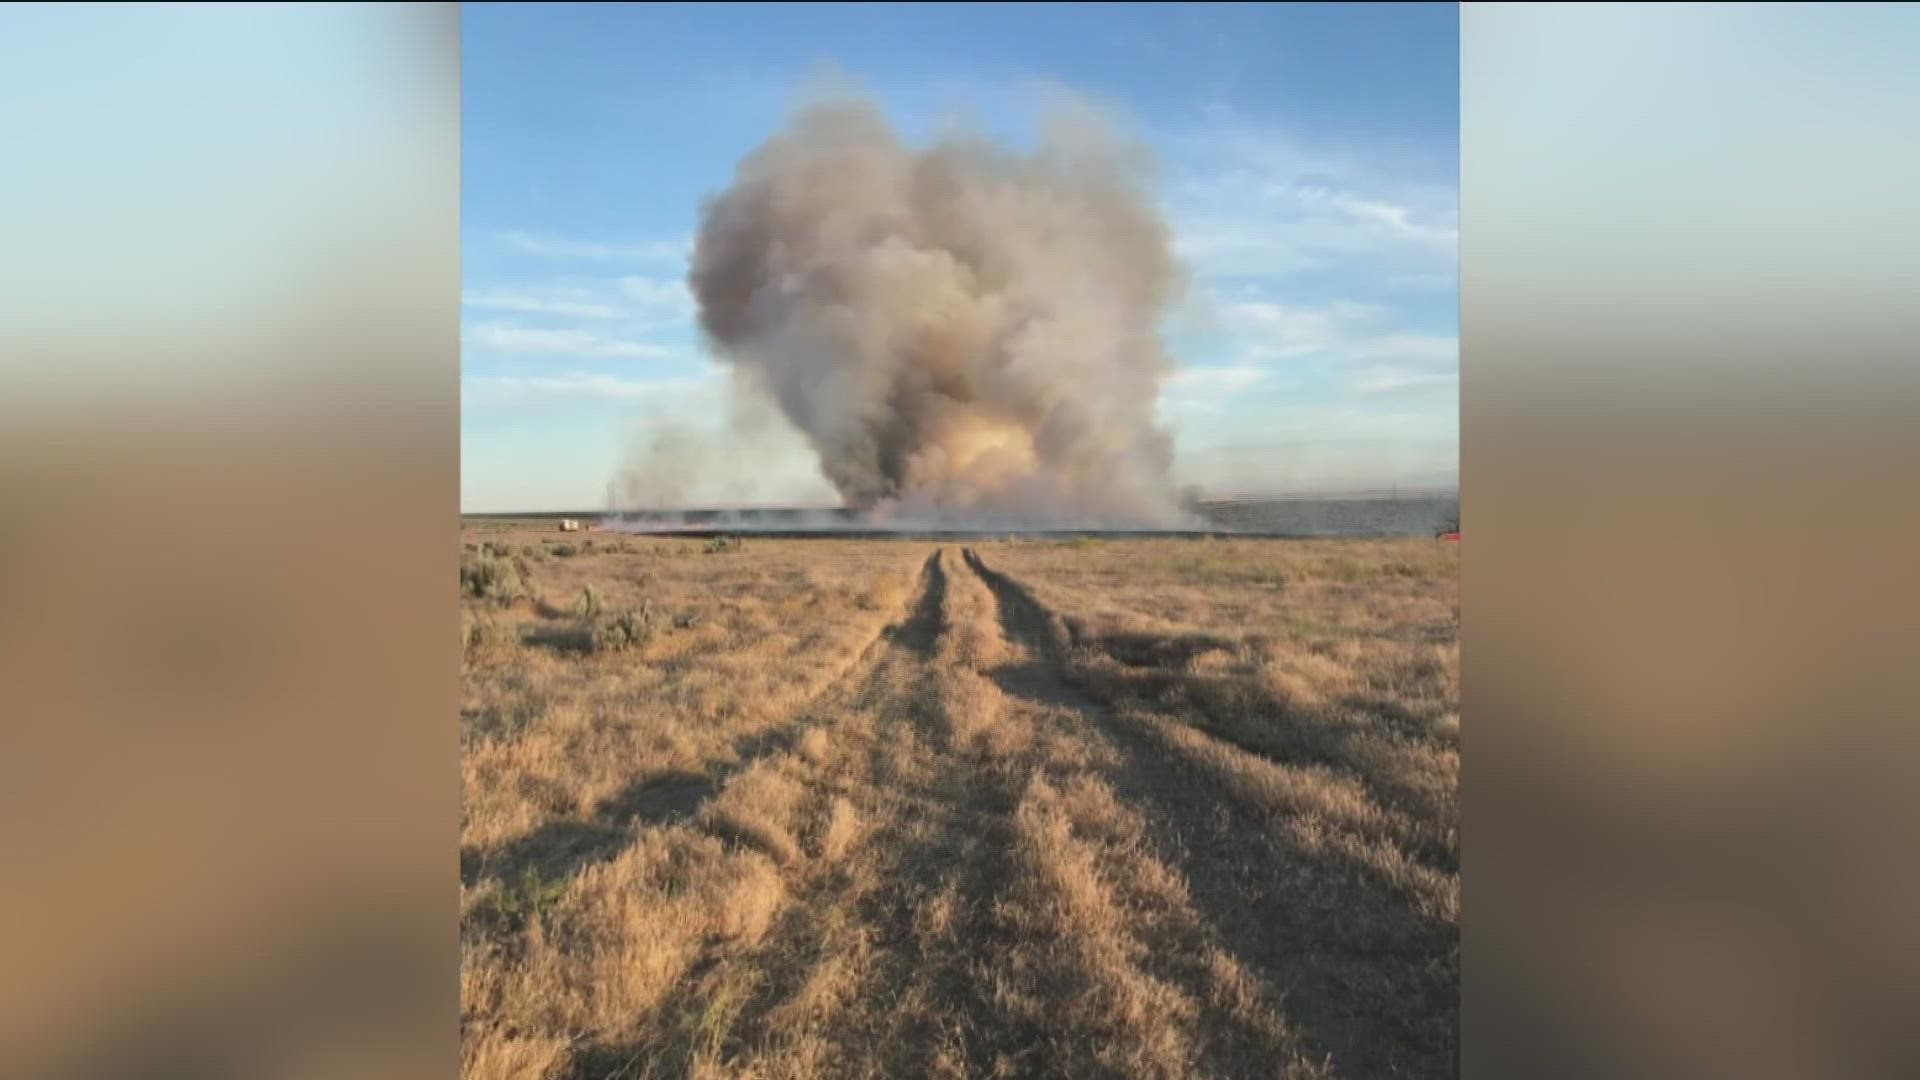 Talon Fire Was Caused By Shooting Blm Said 2914